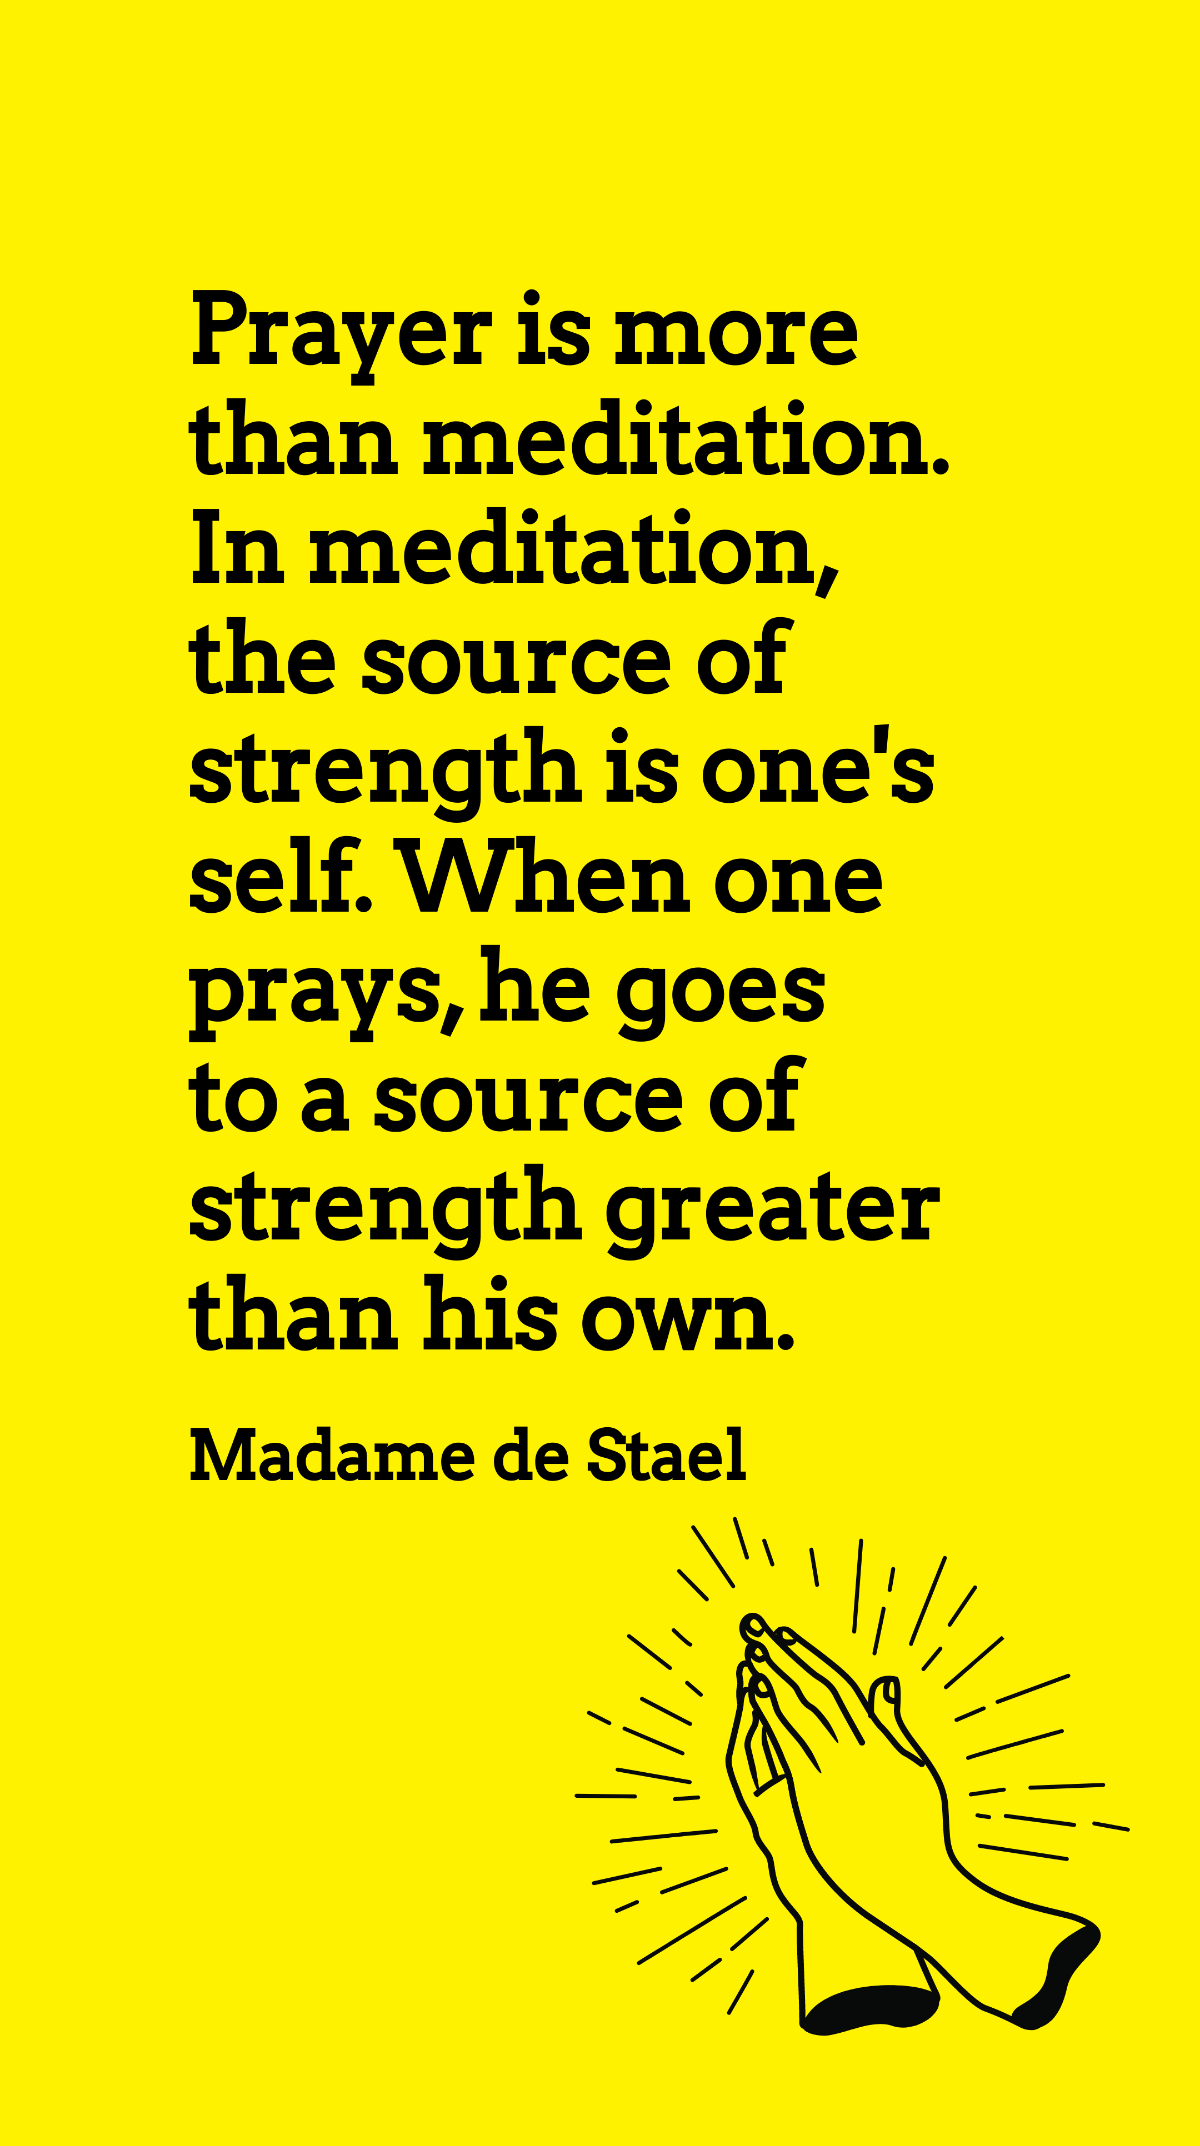 Madame de Stael - Prayer is more than meditation. In meditation, the source of strength is one's self. When one prays, he goes to a source of strength greater than his own. Template